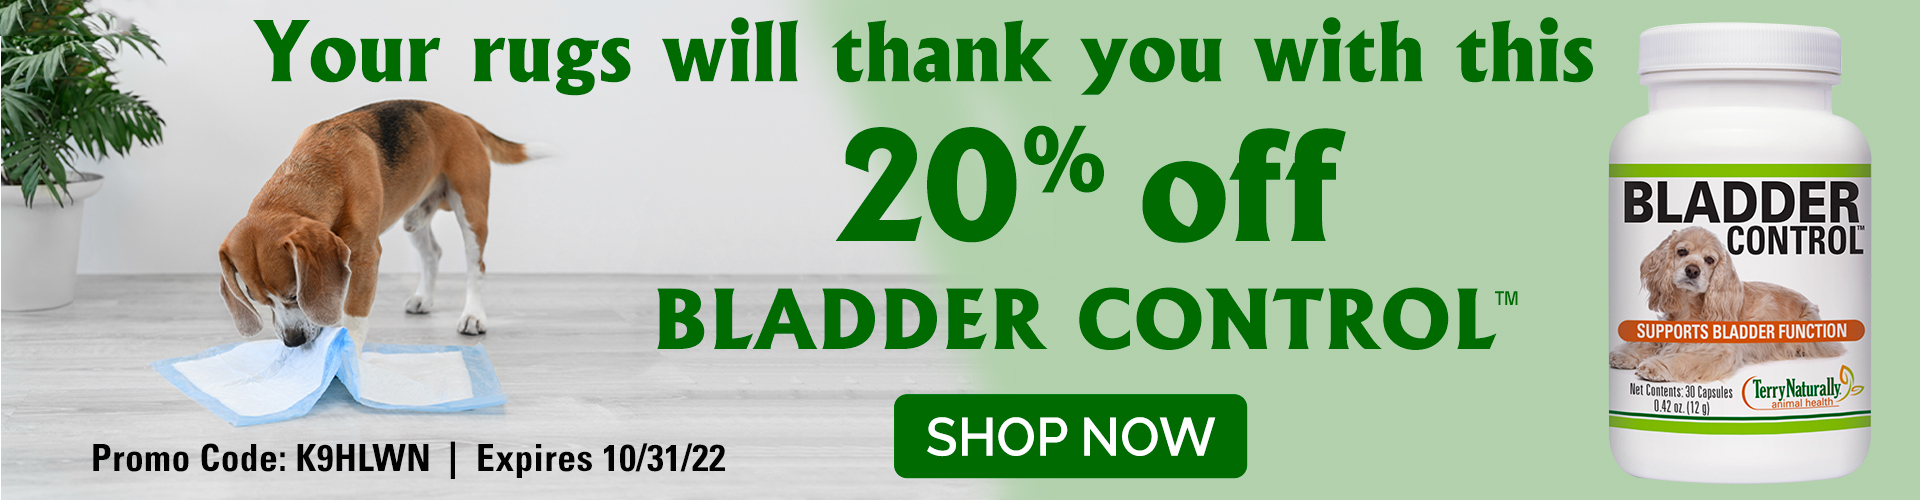 Your rugs will thank you with this 20% OFF BLADDER CONTROL™